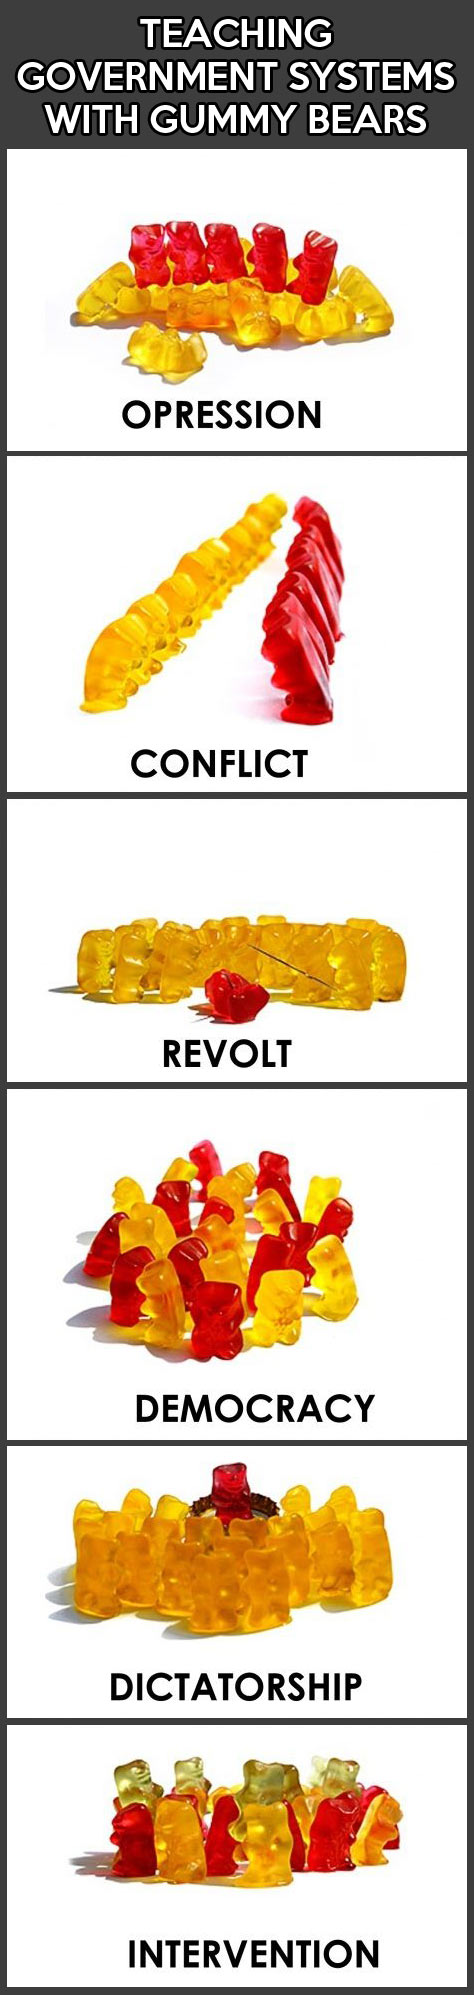 Teaching government with gummy bears.